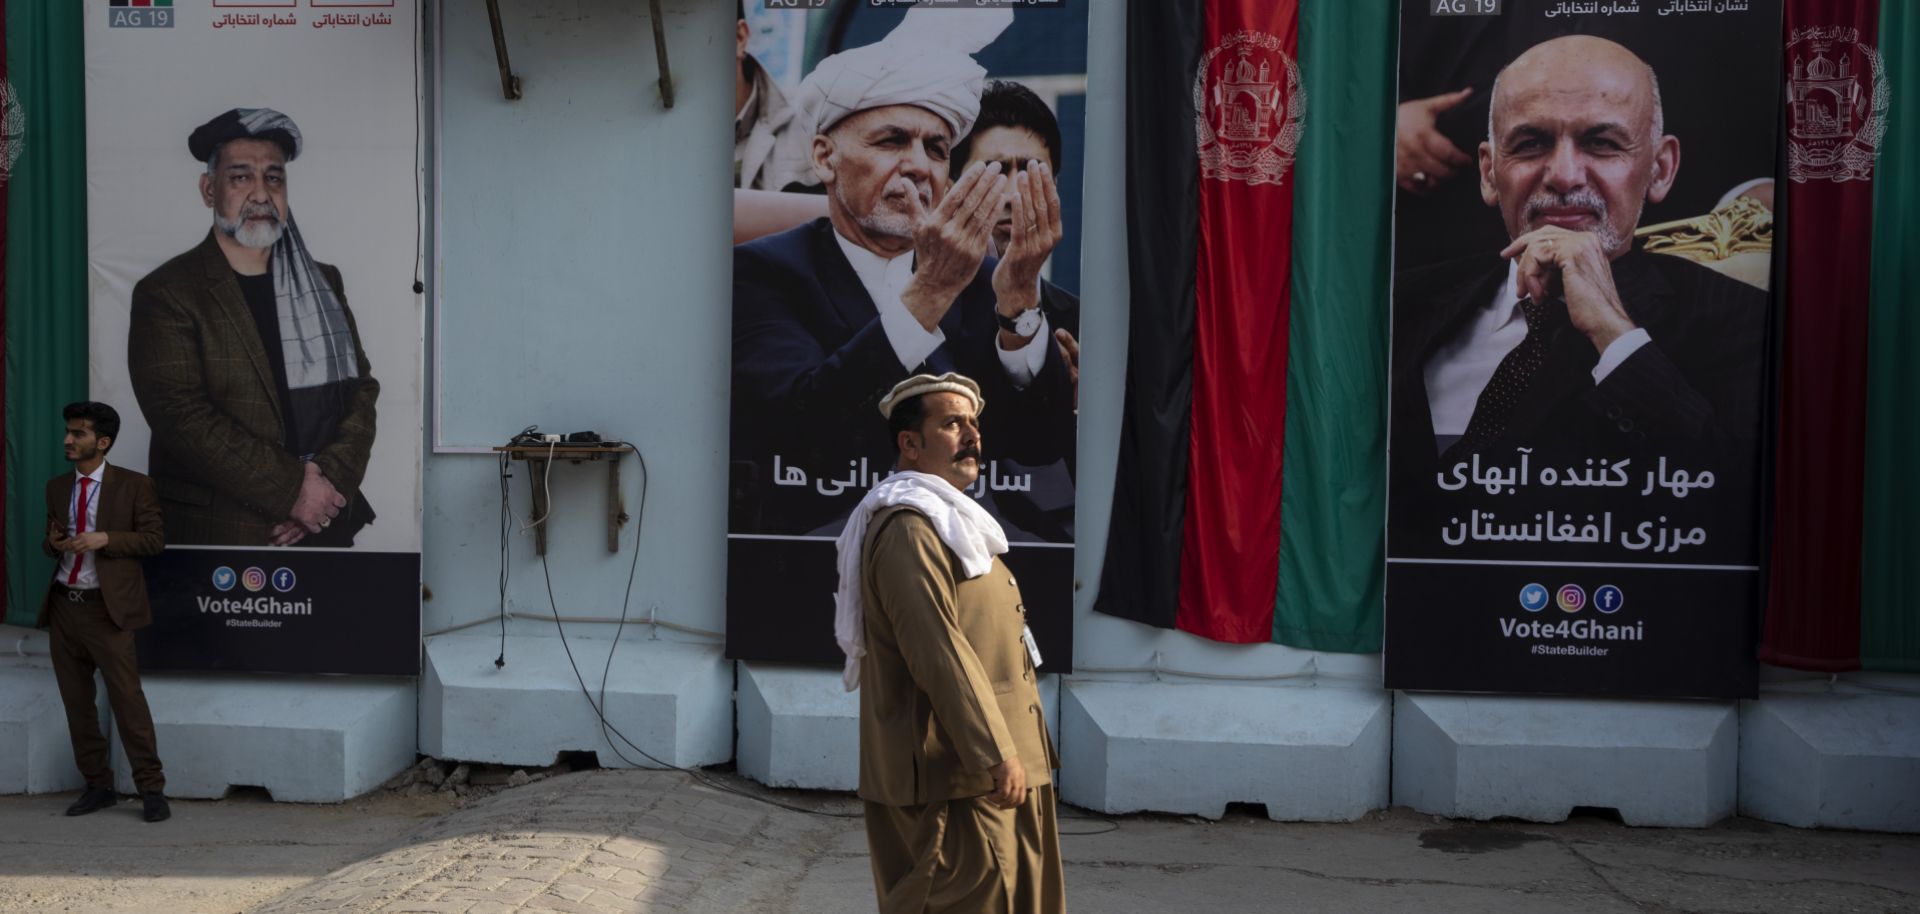 A man walks by election billboards outside of Afghan President Ashraf Ghani's campaign headquarters in Kabul on Sept. 29.